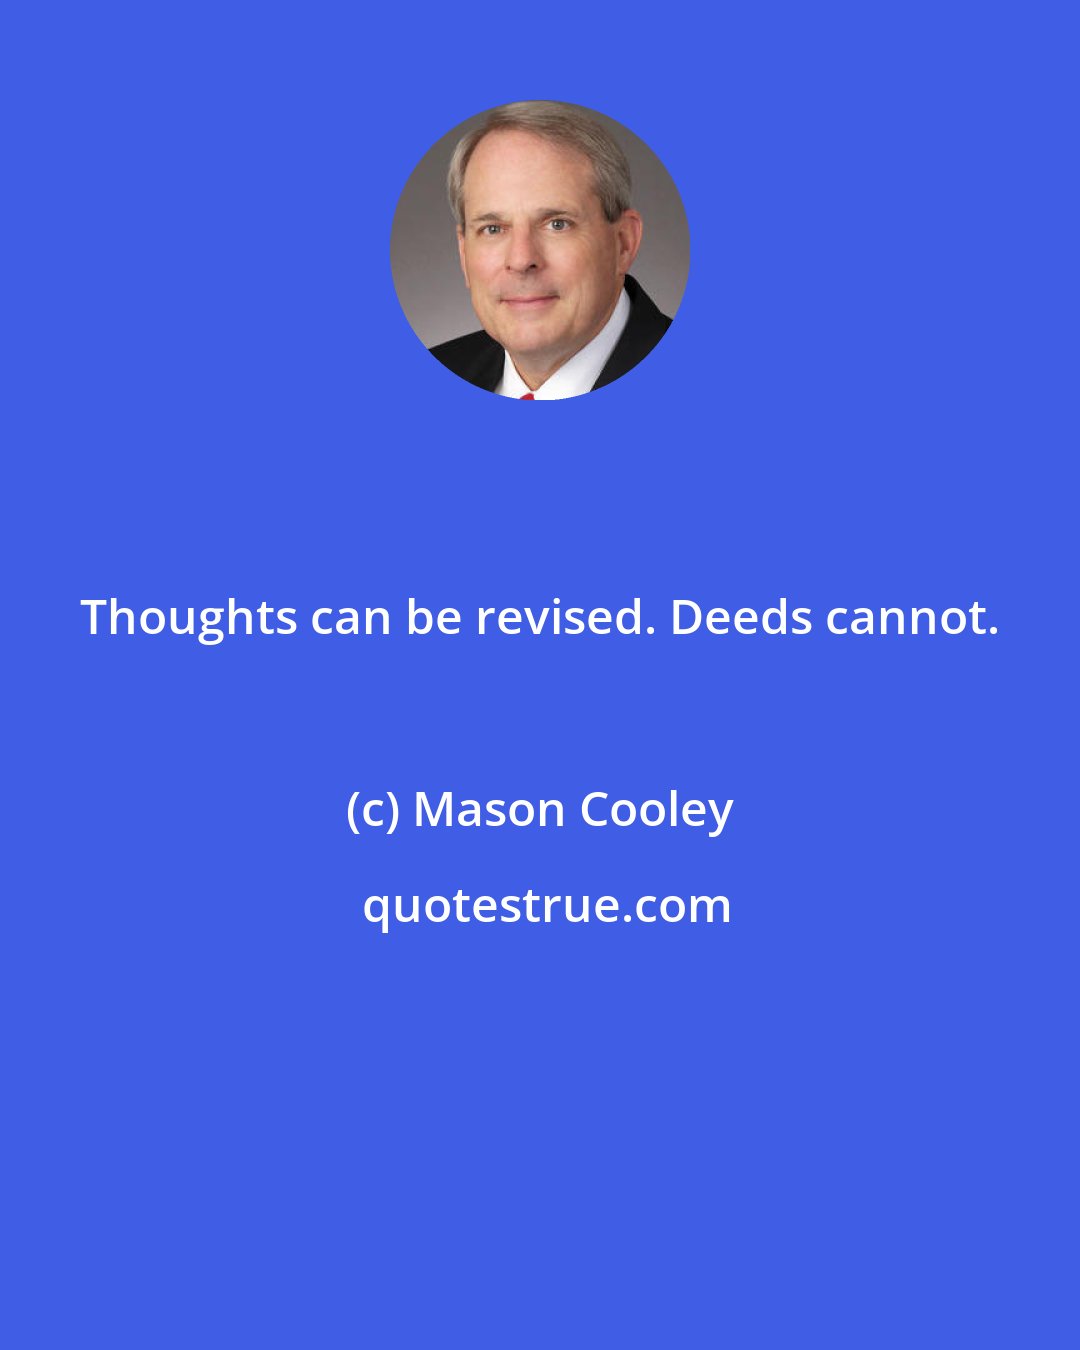 Mason Cooley: Thoughts can be revised. Deeds cannot.